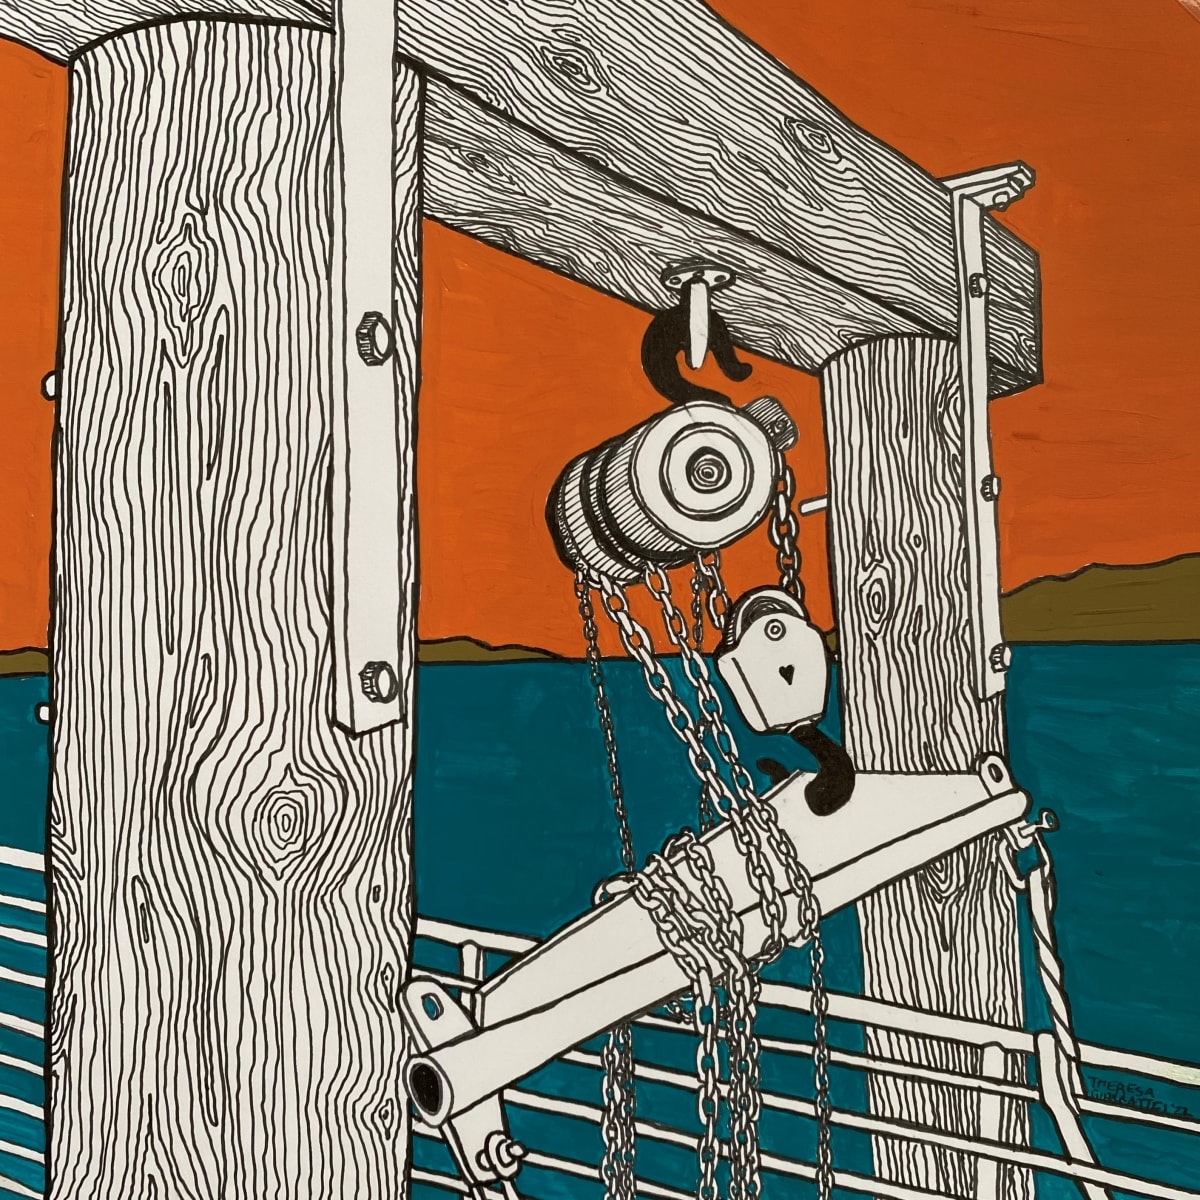 Pull Me Up, Hold Me Down  Image: This work speaks to the push and pull in relationships. and the hard work it takes. Image is of a dock on Santa Cruz Island, CA.